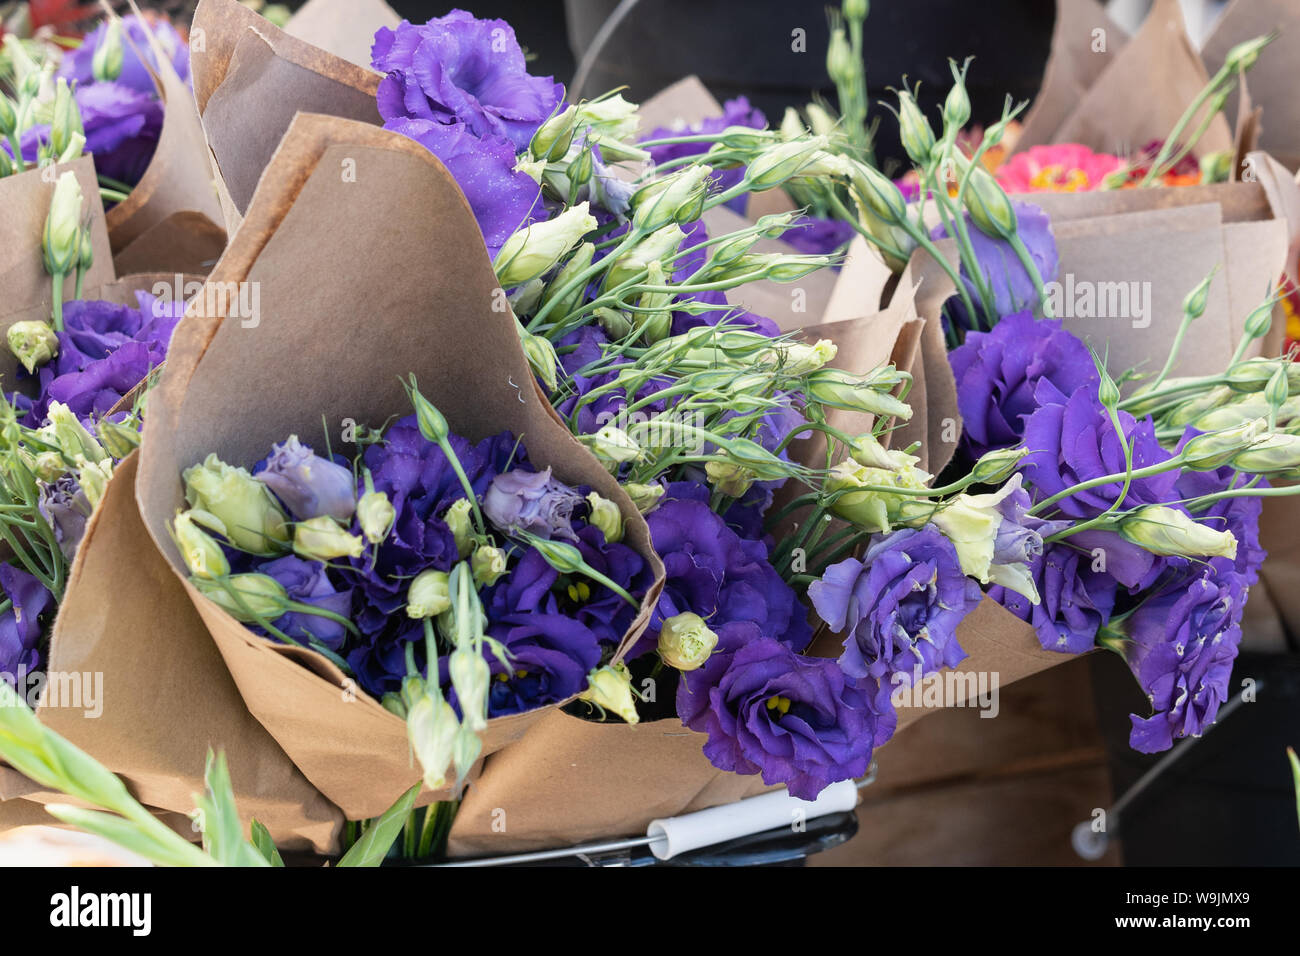 buckets of purple licanthus flowers in bloom and buds wrapped in brown paper at the farmers market Stock Photo